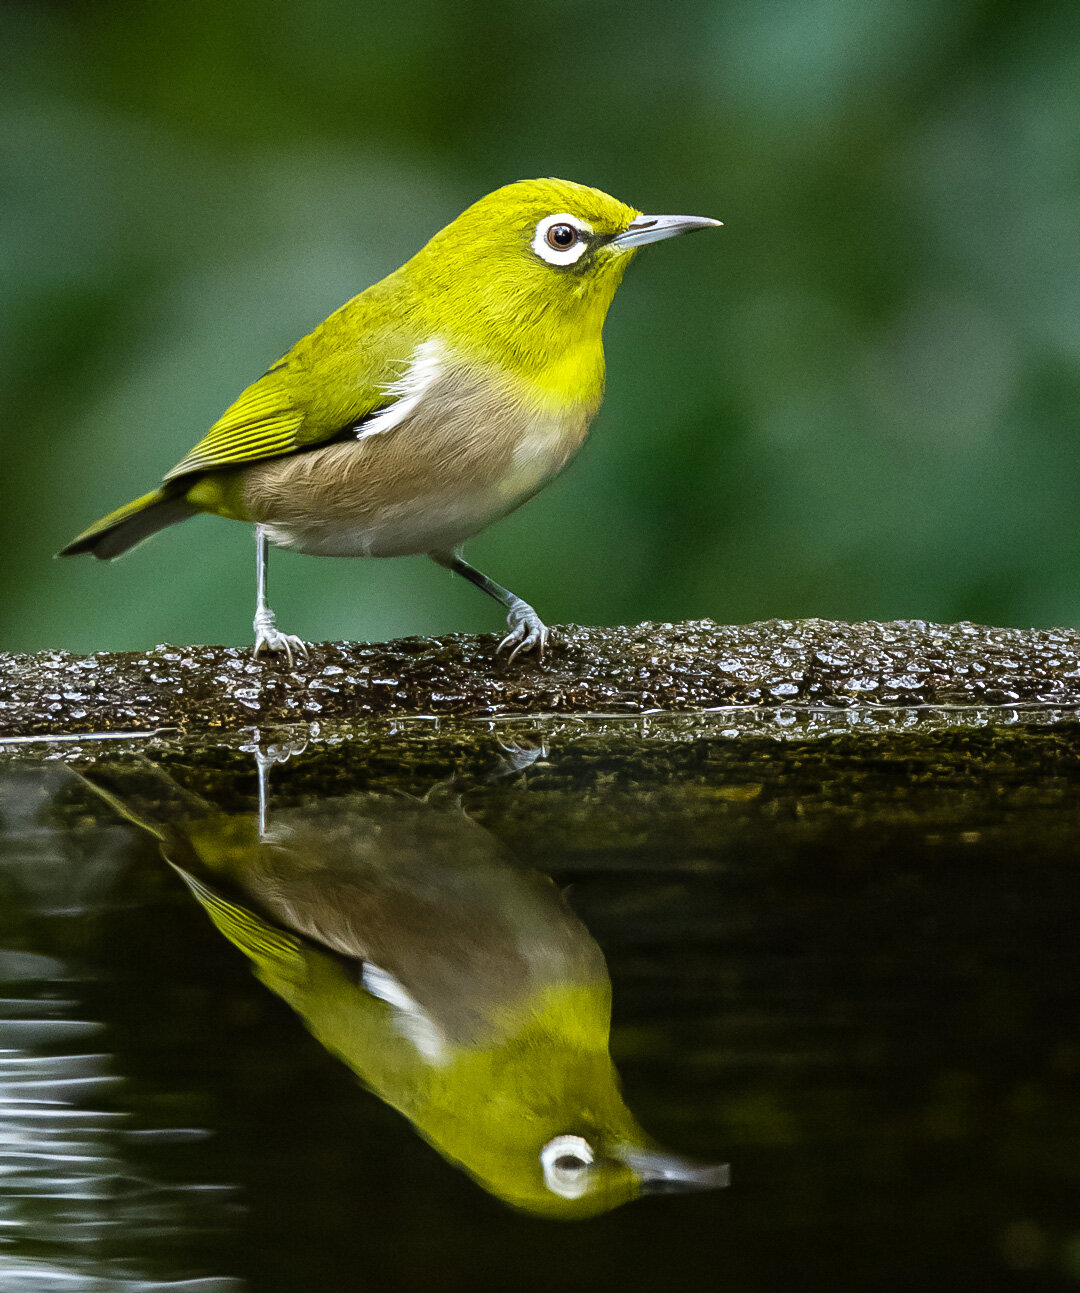 Japanese White-Eye at the Drinking Spot! 🐦
Their distribution is mainly in Japan and eastern Asia, but they have also been introduced to various Pacific islands, including Hawaii!
These birds primarily feed on insects, nectar, and fruits. They posse